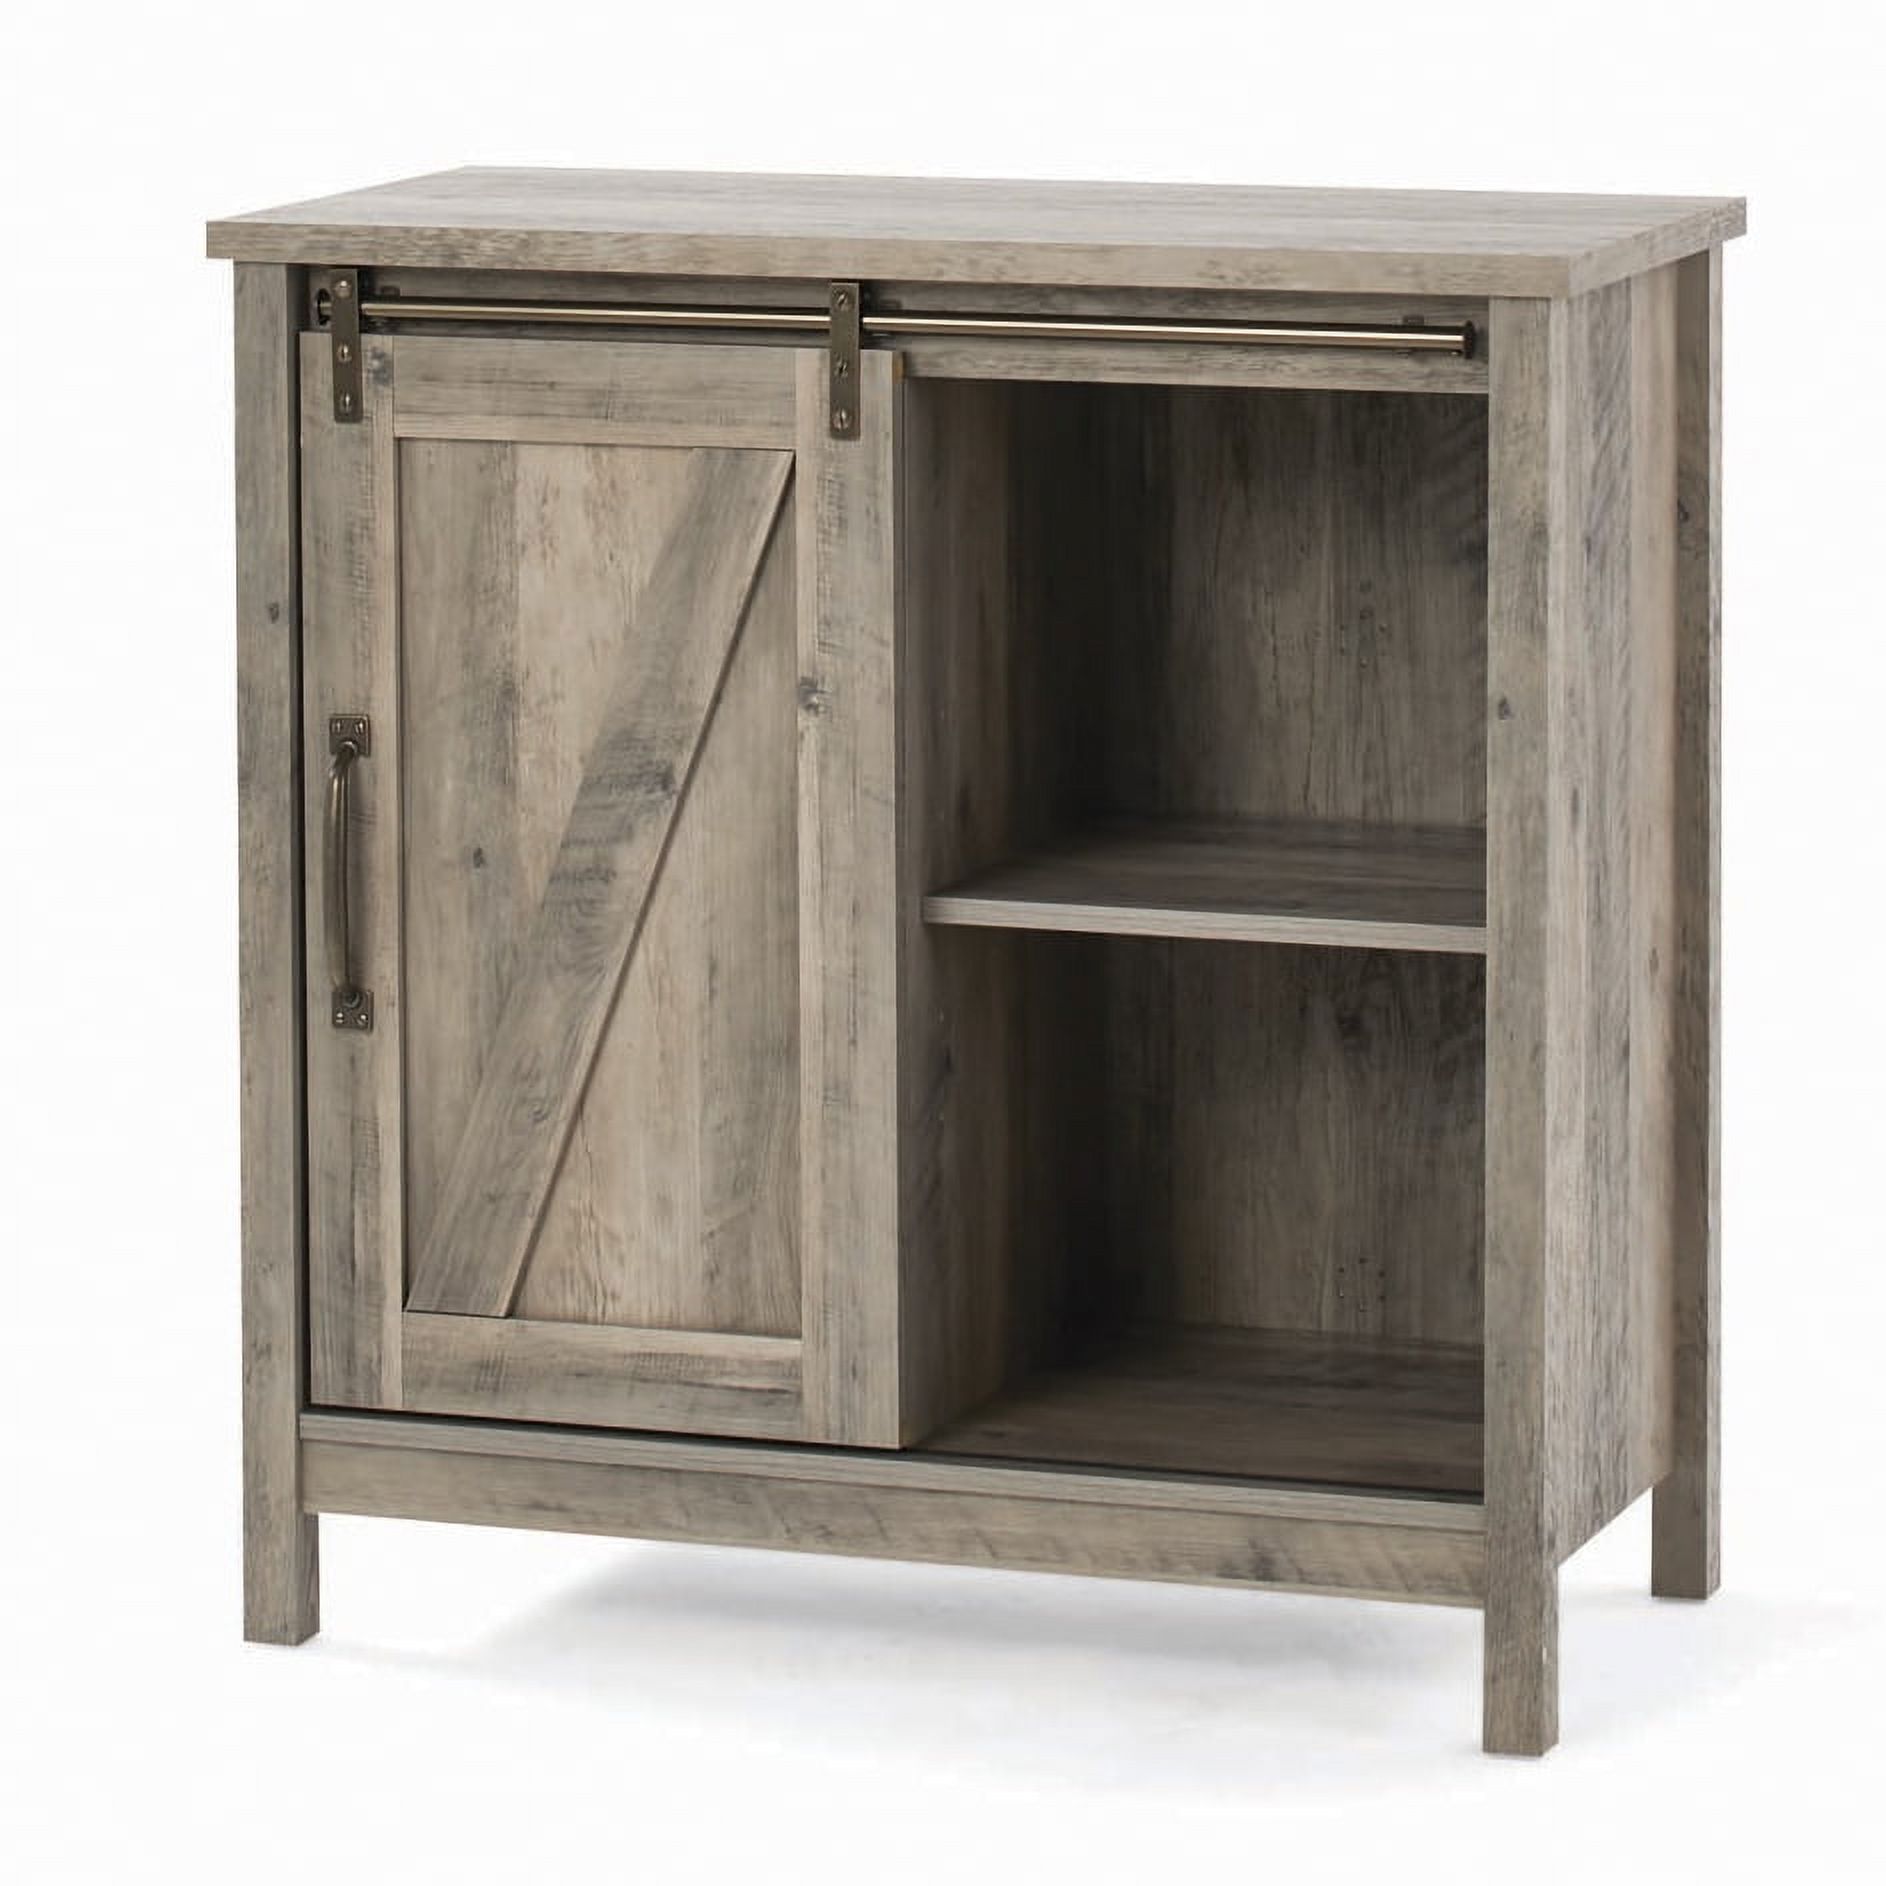 Better Homes & Gardens Modern Farmhouse Accent Storage Cabinet, Rustic Gray Finish - image 4 of 13